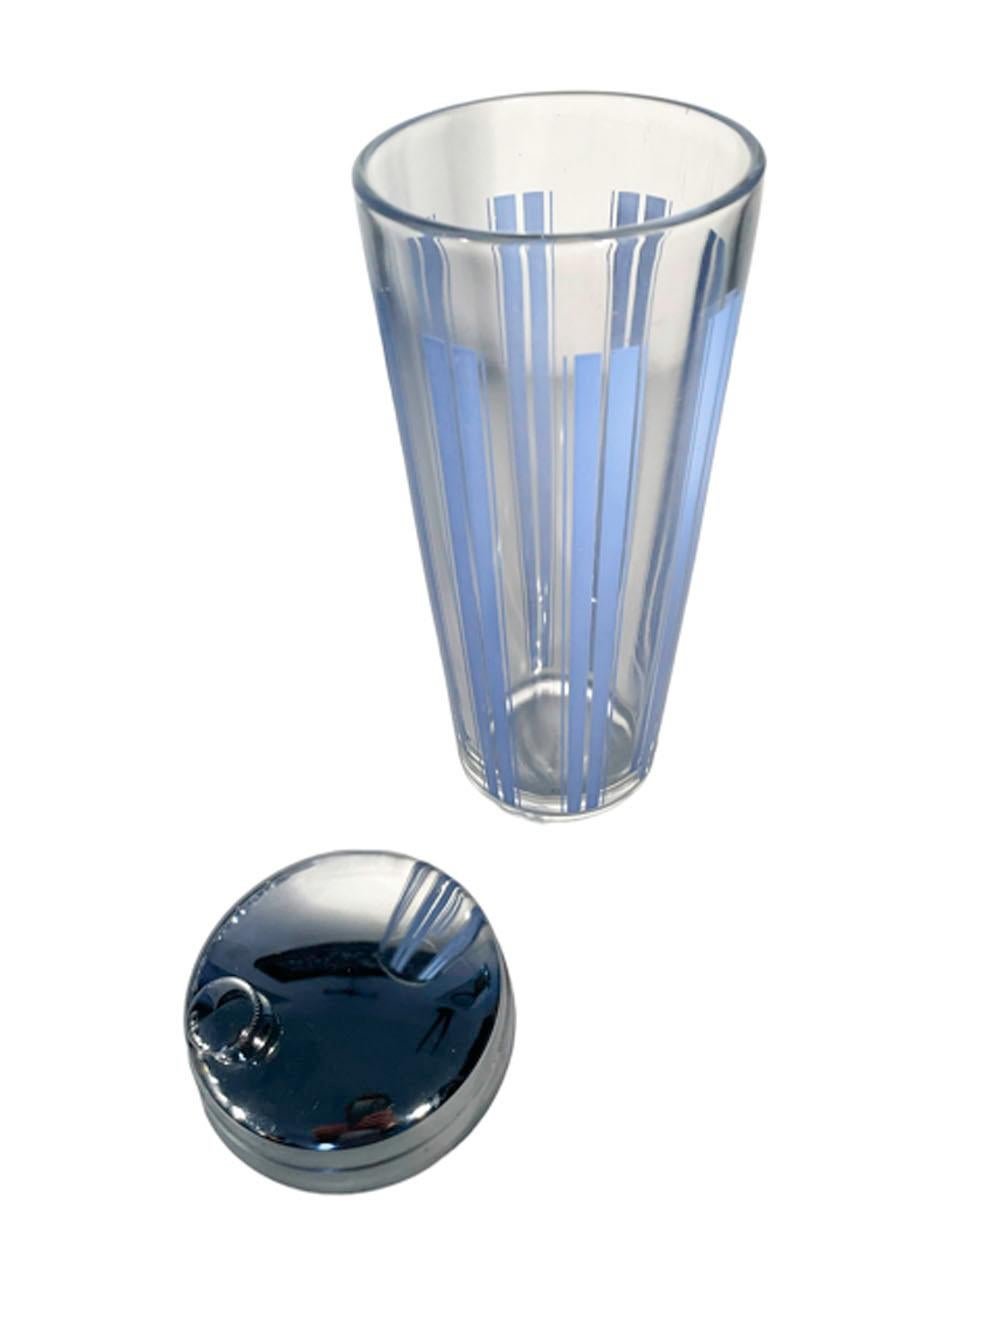 20th Century Art Deco Cocktail Shaker with Blue Enamel Vertical Lines & Chrome Lid For Sale